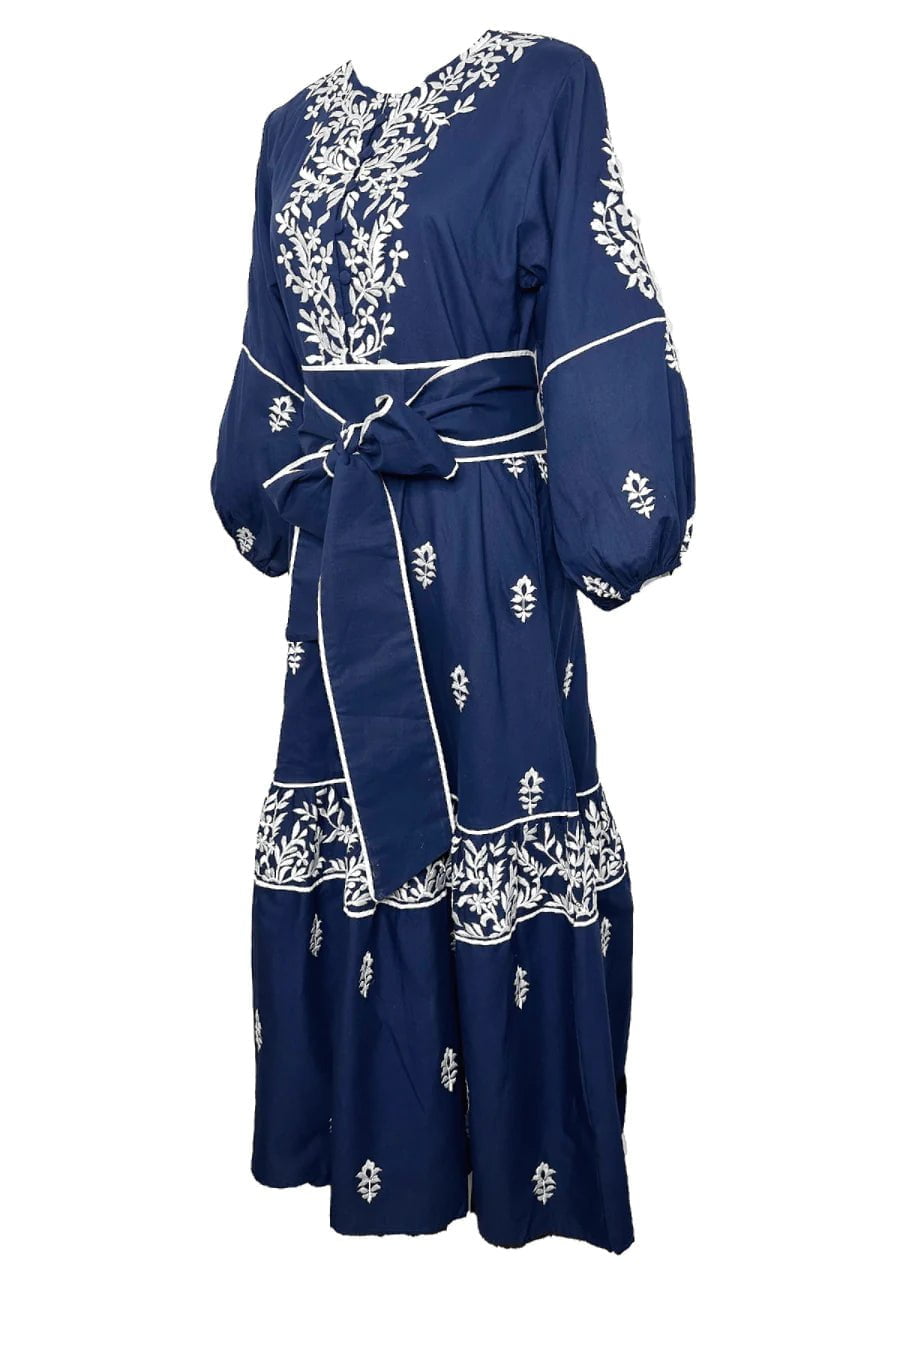 Sue Sartor Dress Jewel Neck Flounce in Navy / White Embroidered Mughal